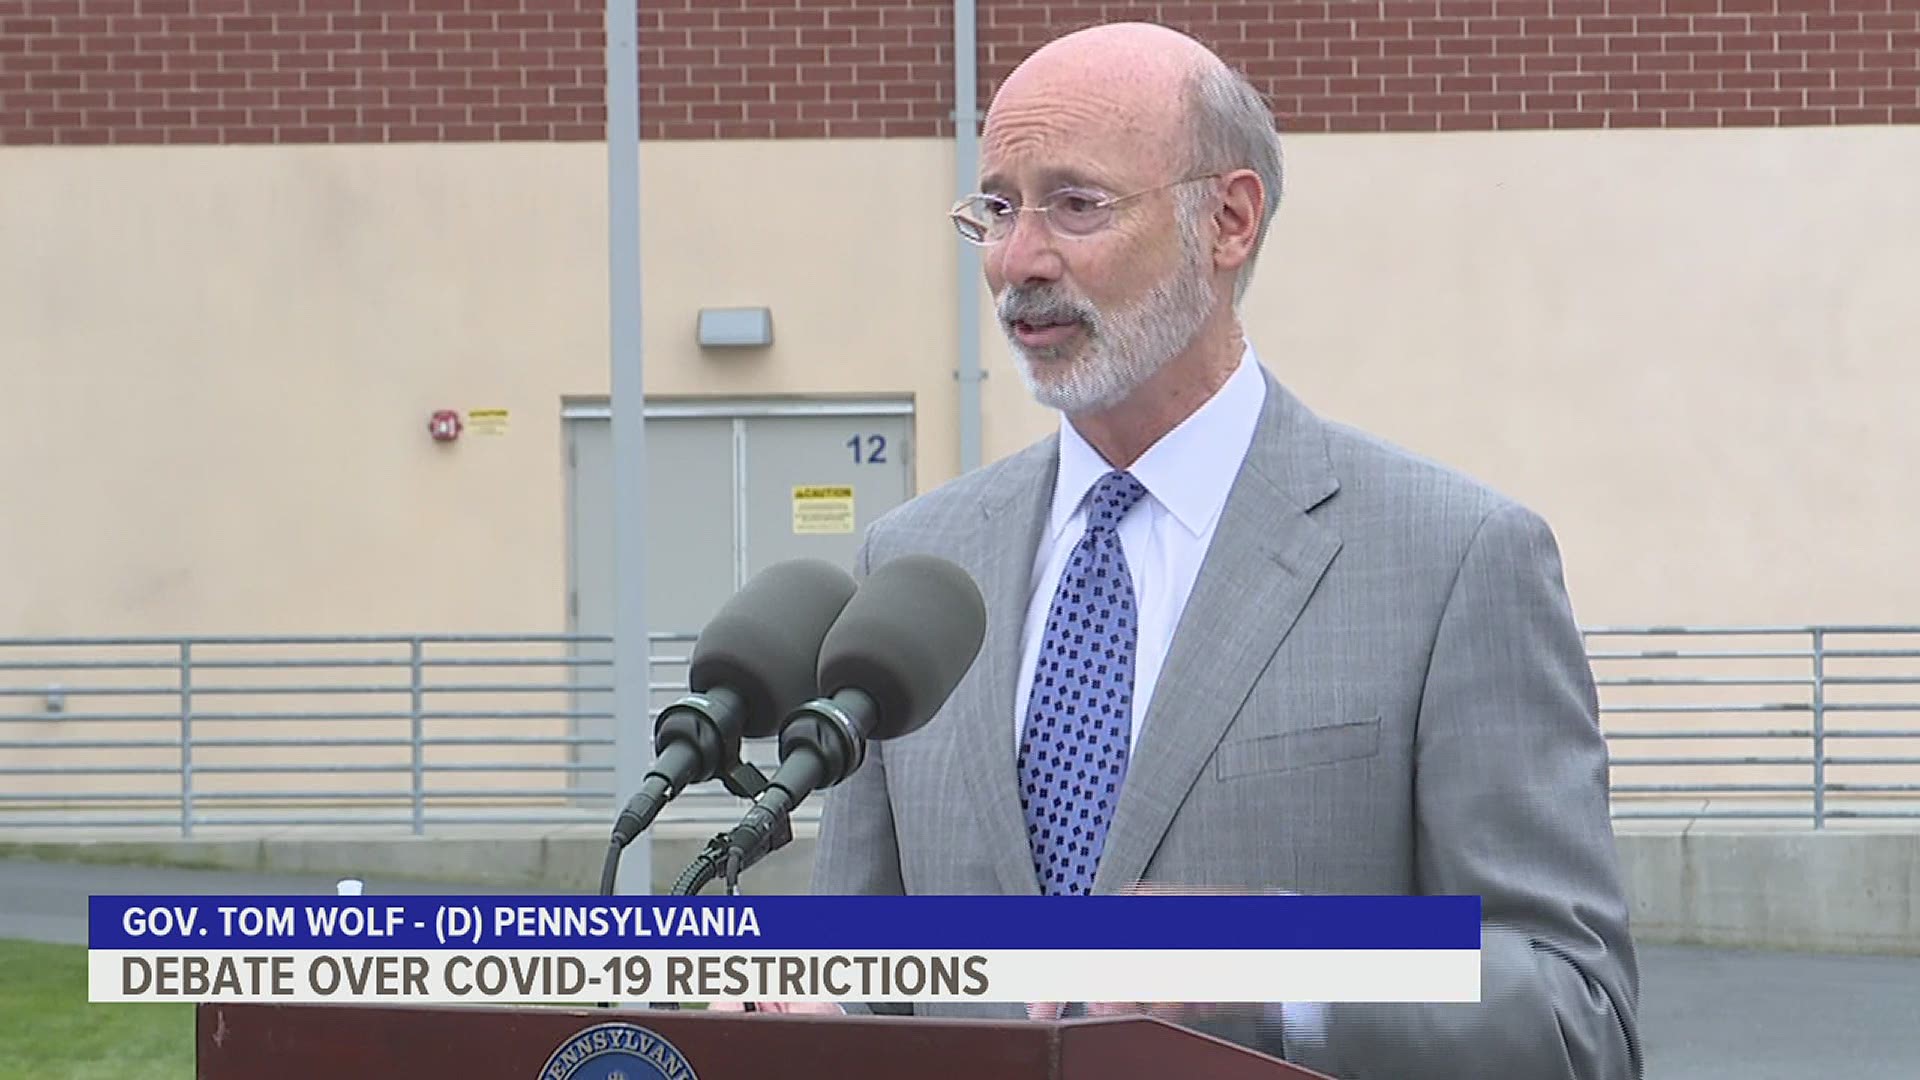 Governor Wolf defends COVID-19 restrictions, calls legislation to overturn them 'dangerous'